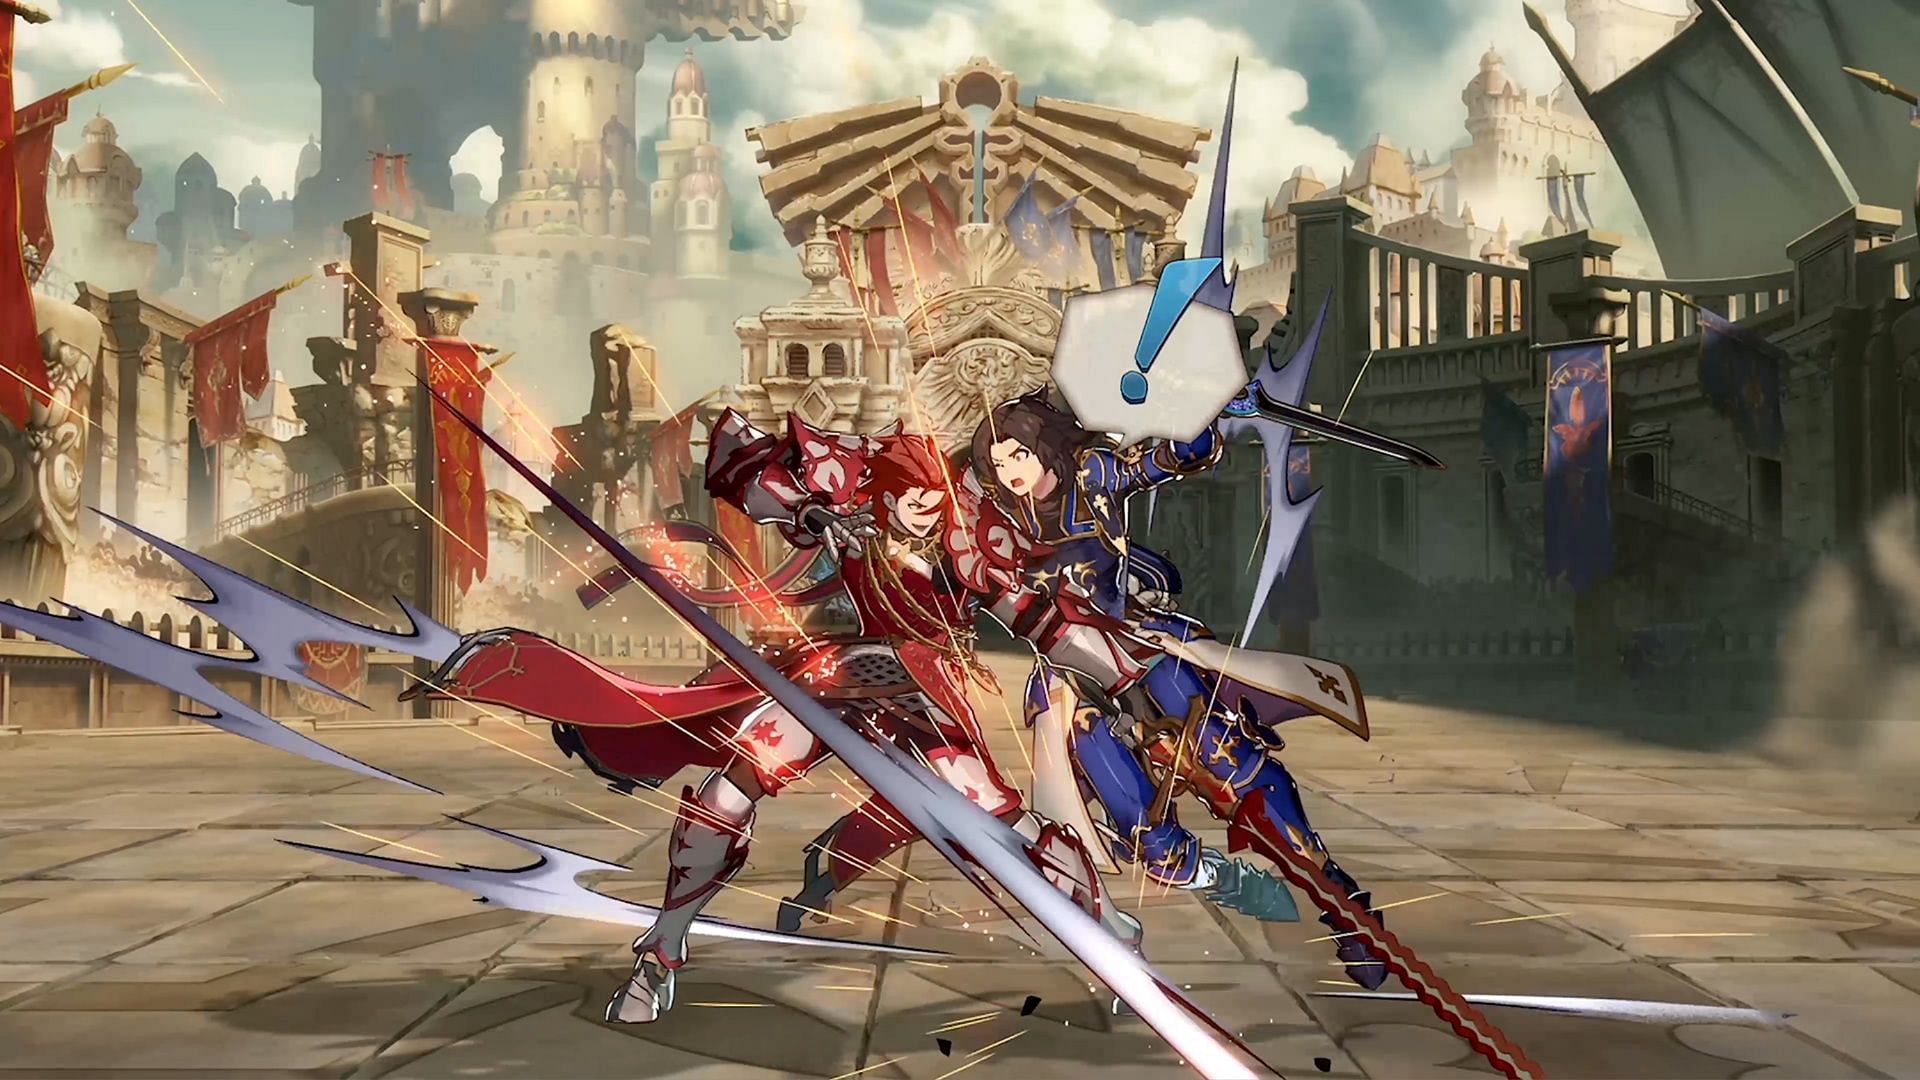 Granblue Fantasy Versus: Rising updates the base game with more